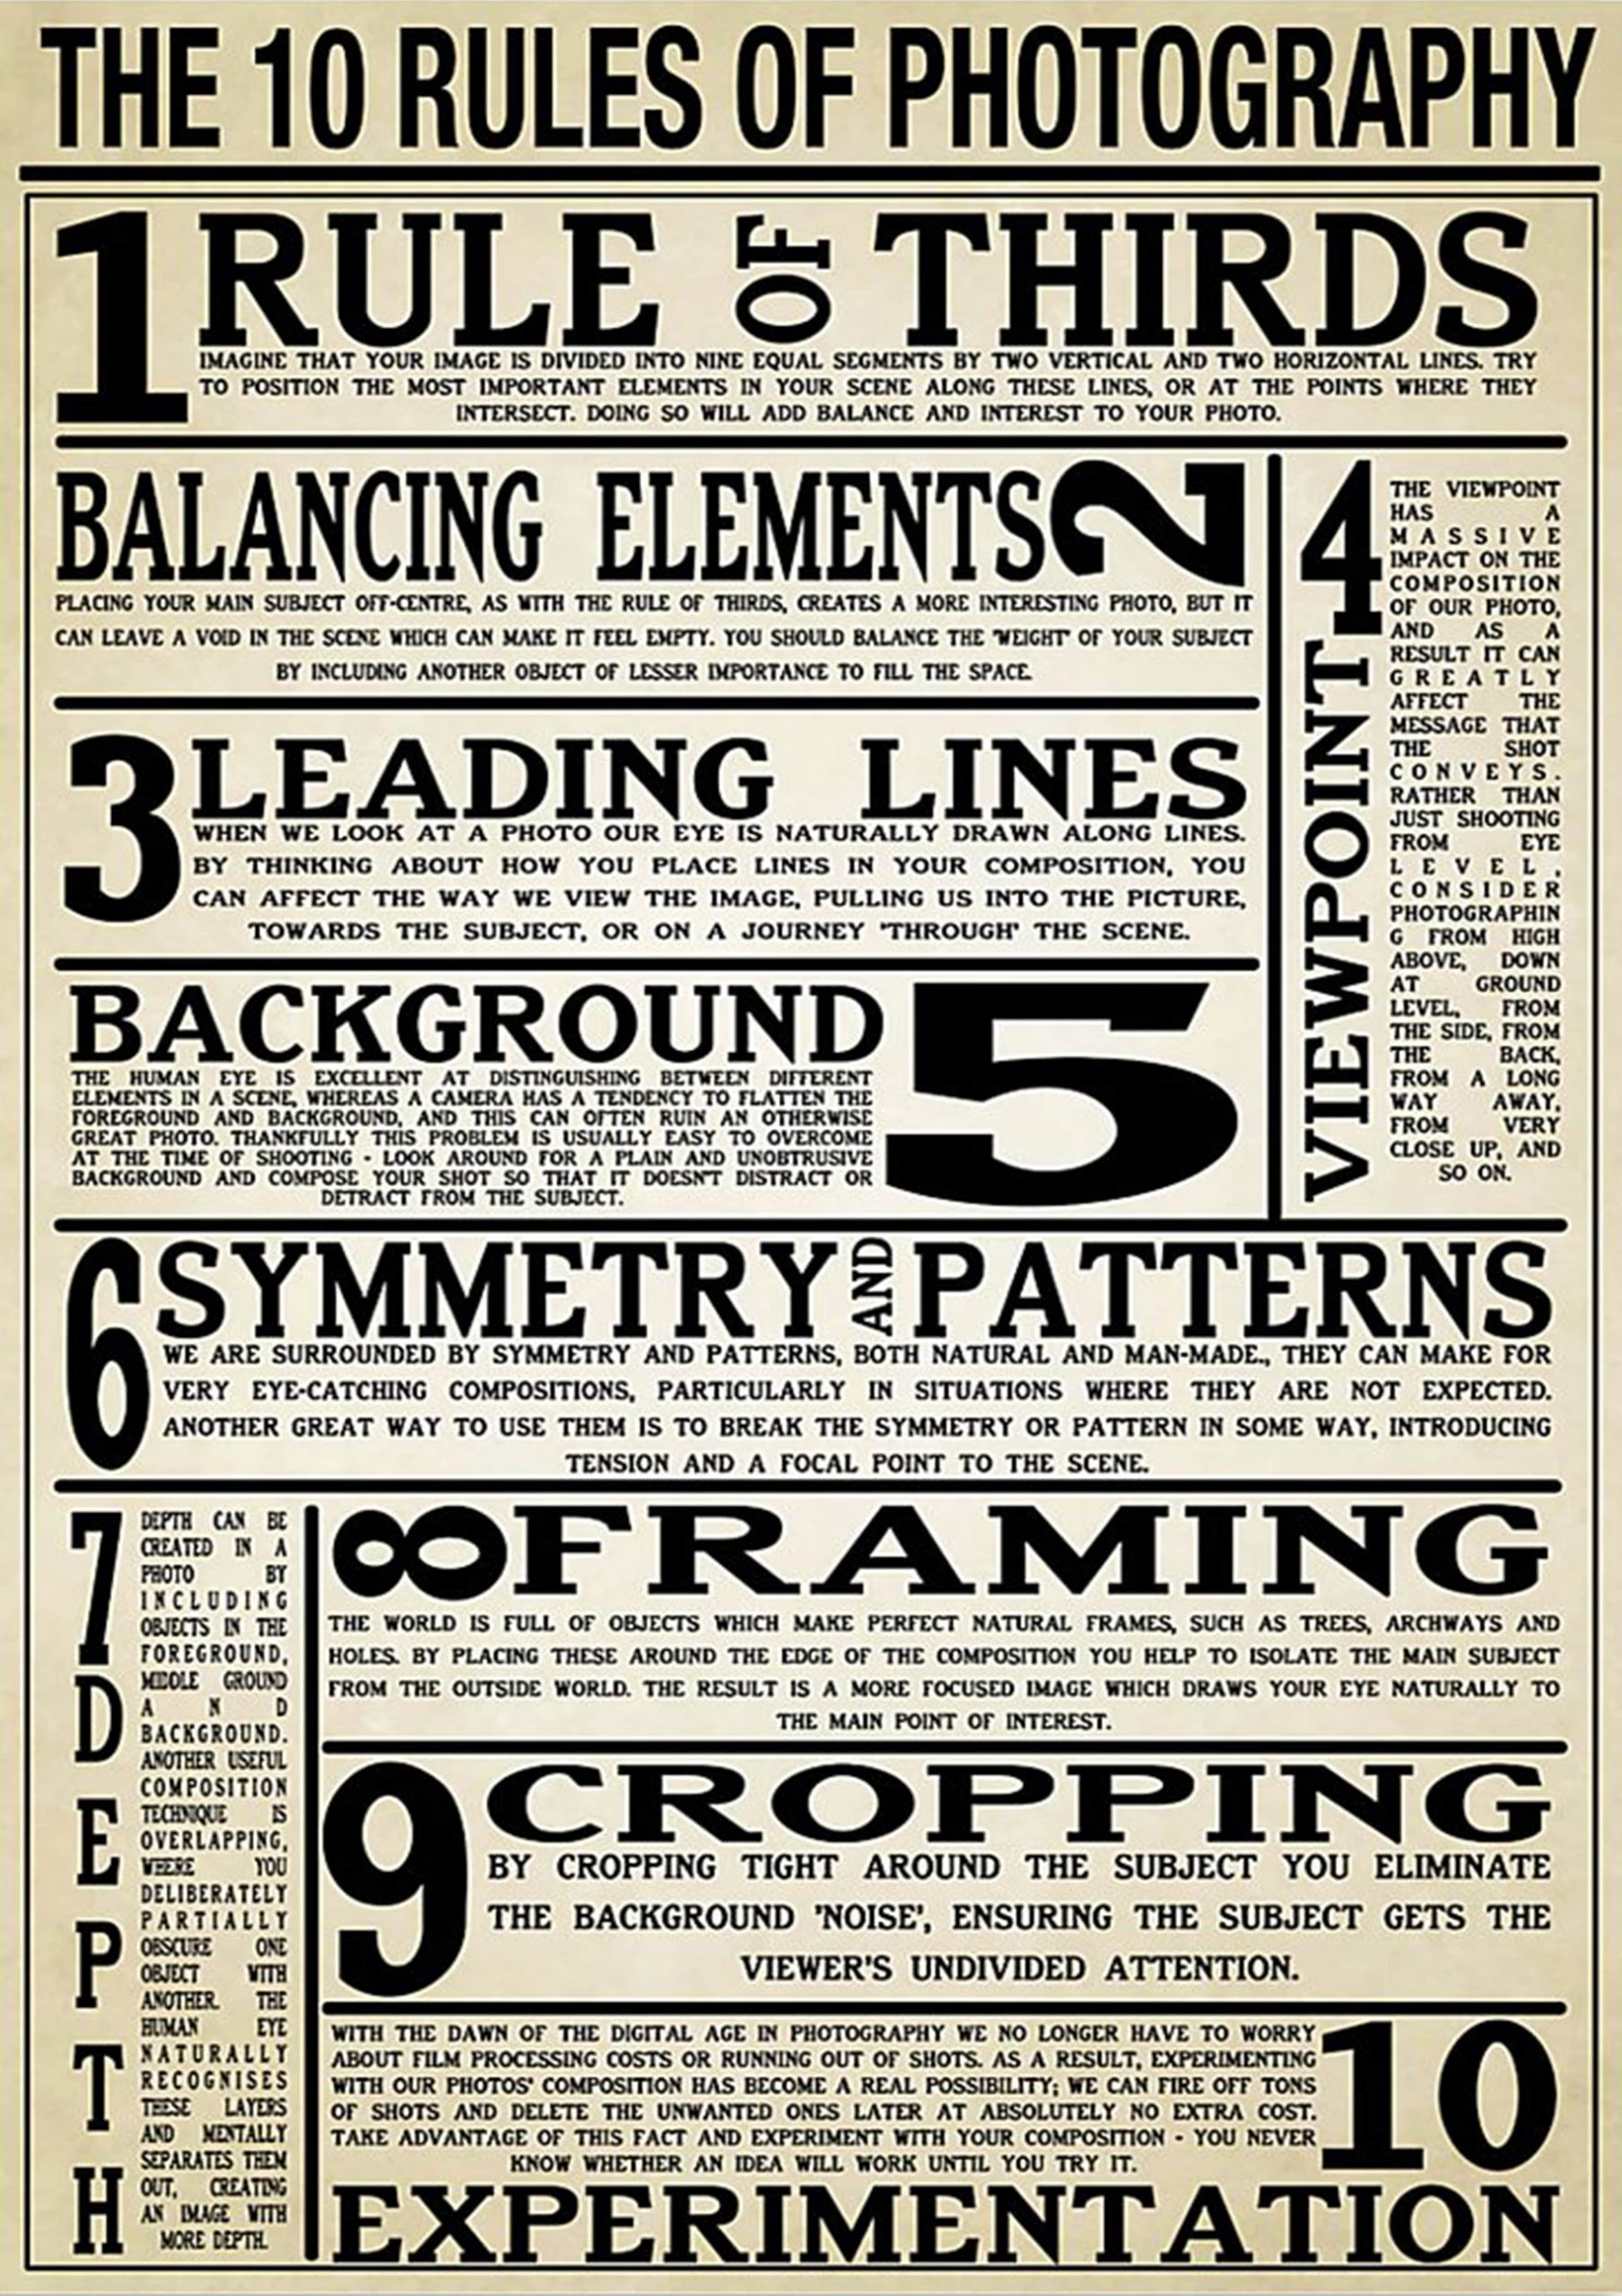 vintage the 10 rules of photography poster 1 - Copy